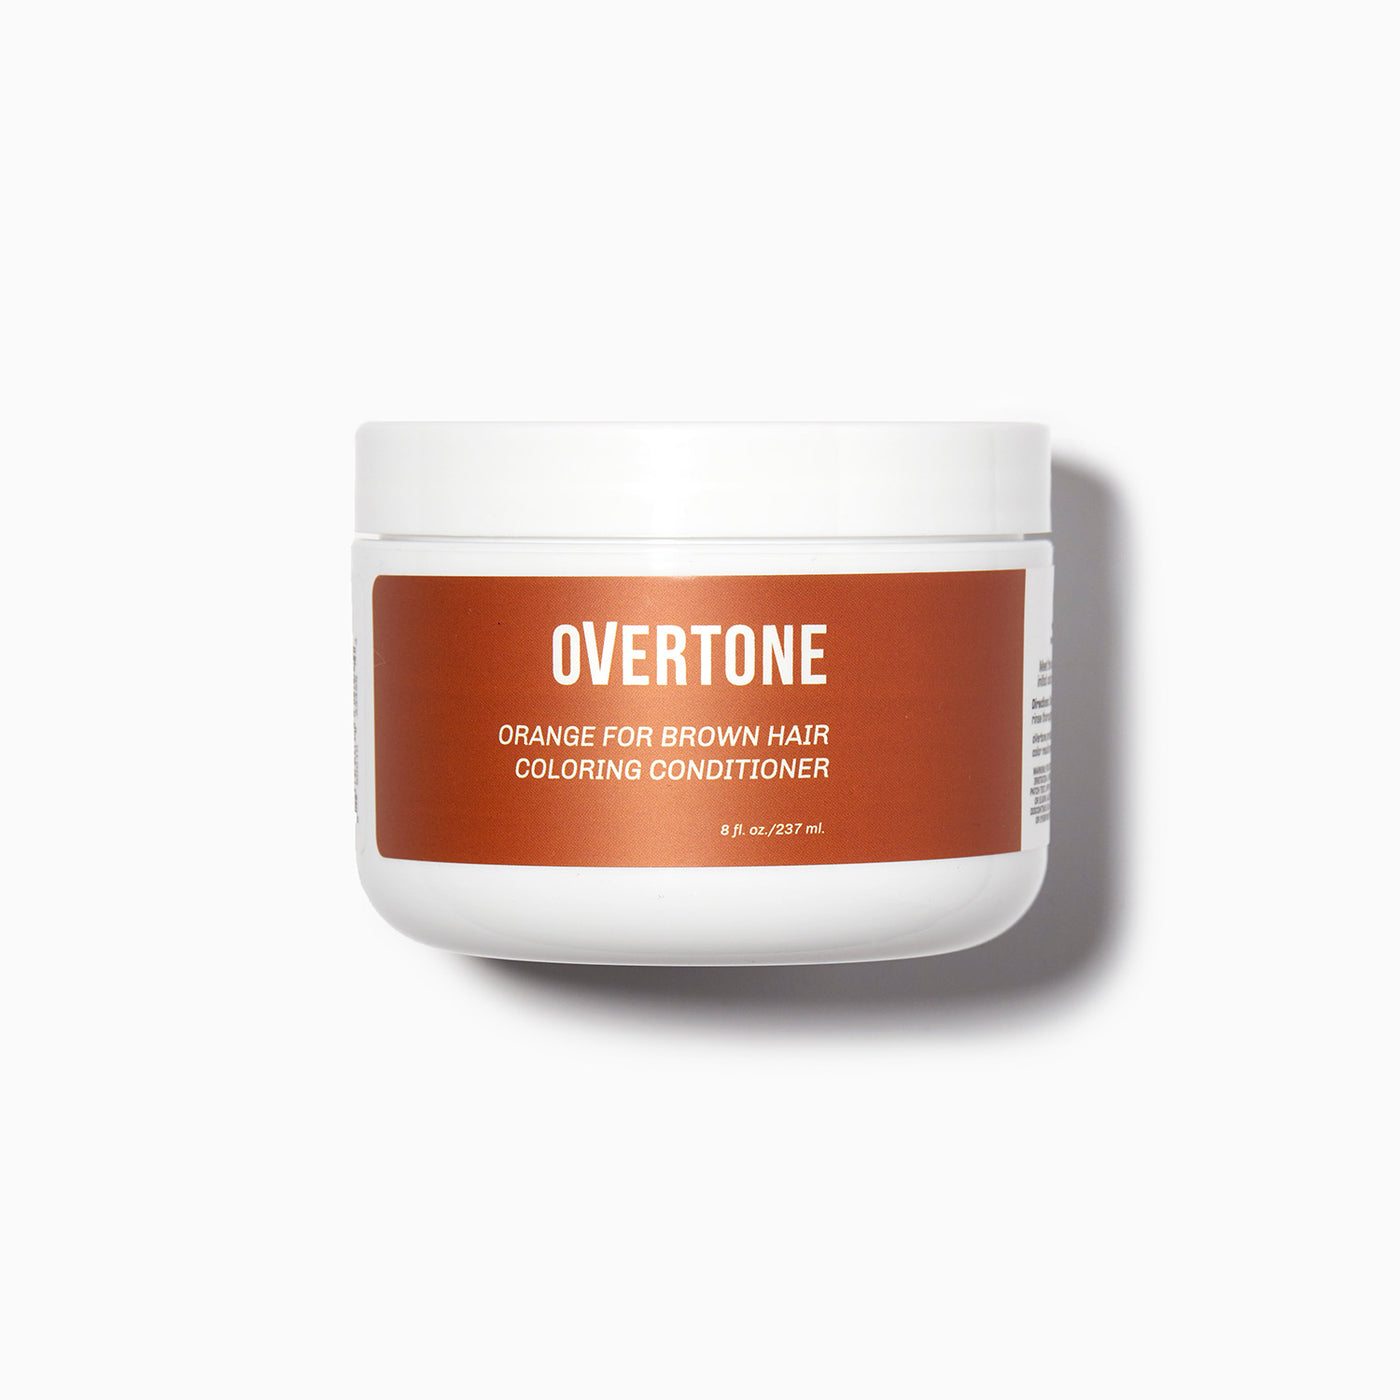 oVertone Orange For Brown Hair Coloring Conditioner